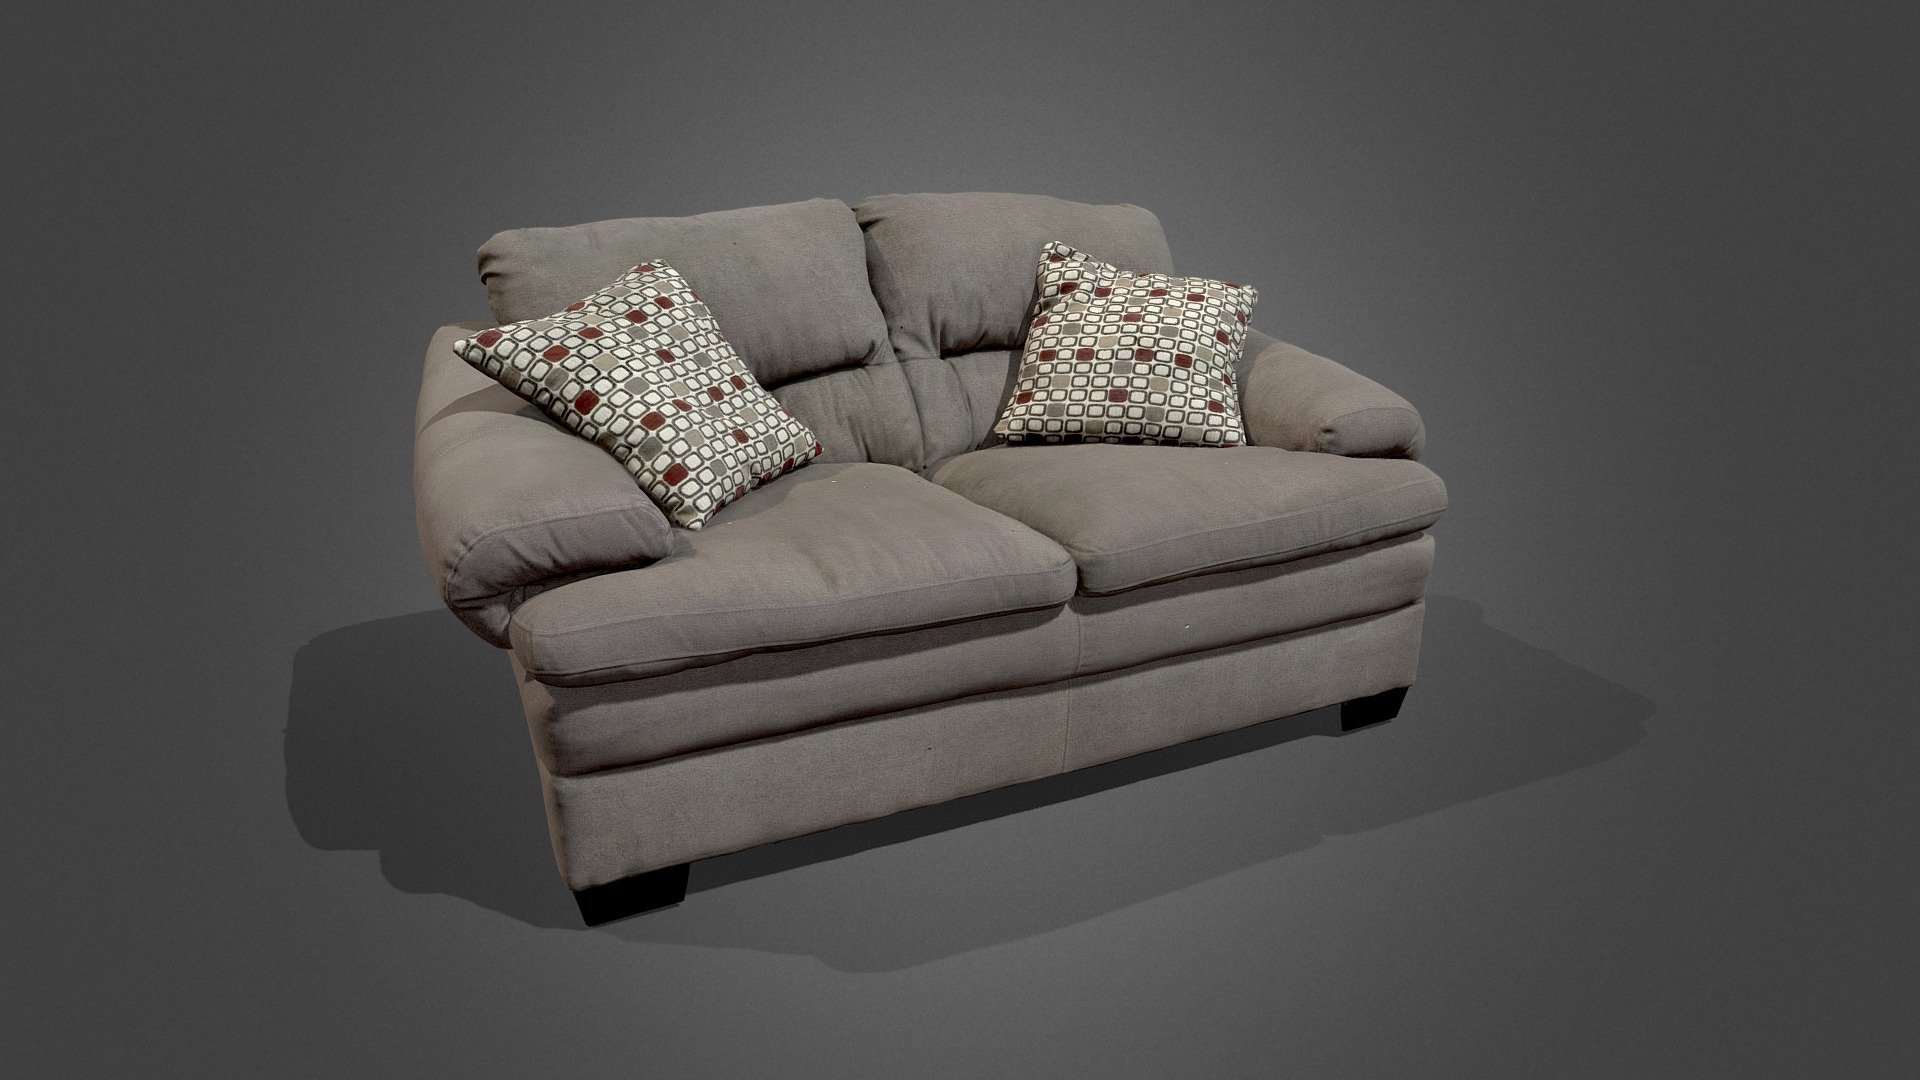 (Remote-location) 3D Scan of a full-sized sofa. 3D Scanned at SD (Standard Definition) quality 3d model